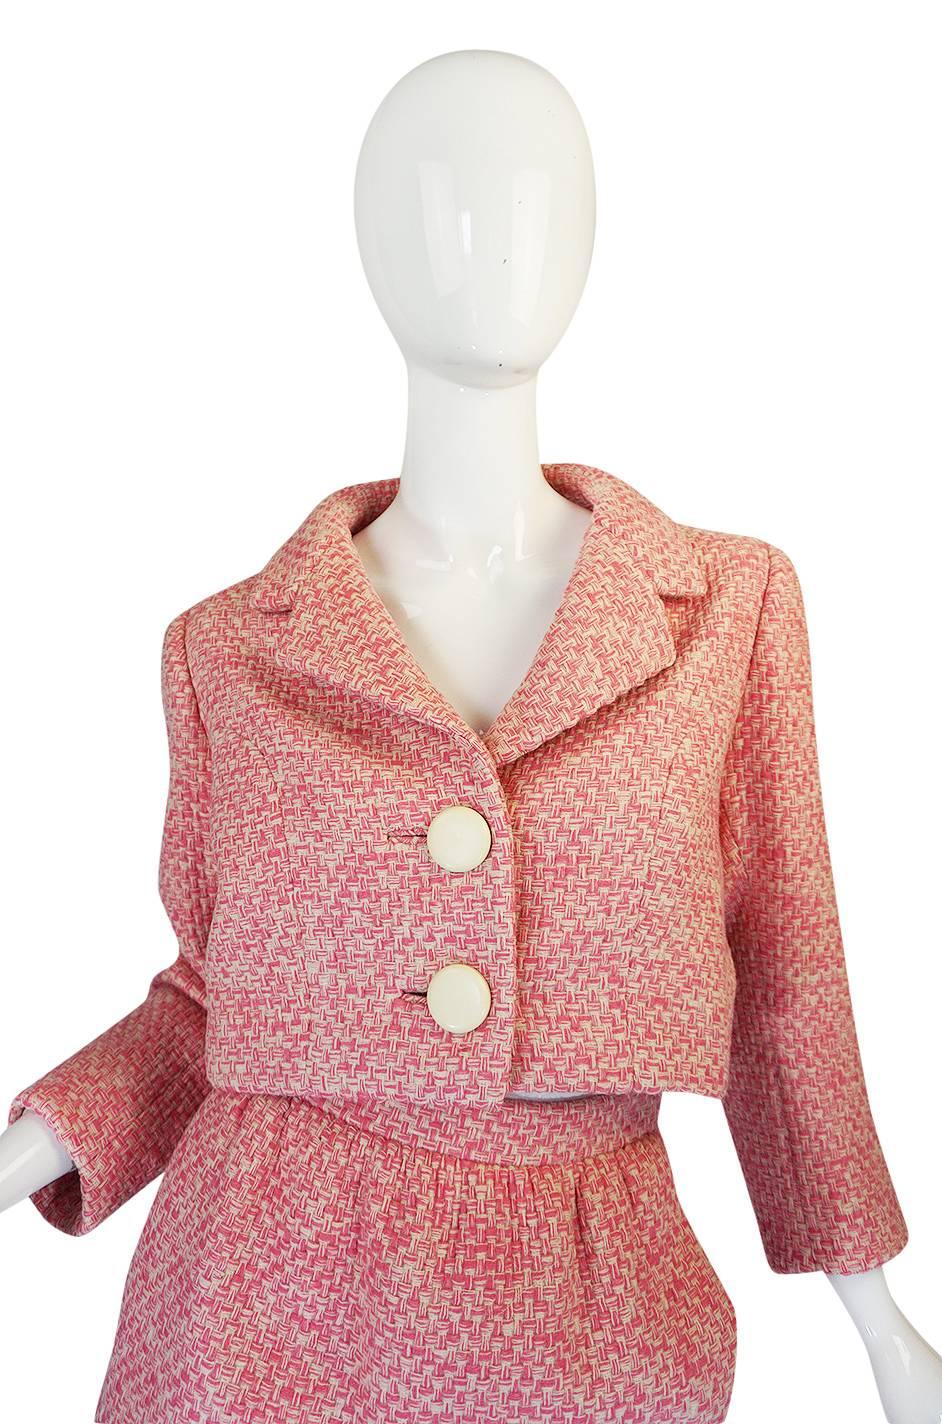 Women's c1963-65 Norman Norell Pink Boucle Cropped Jacket Suit